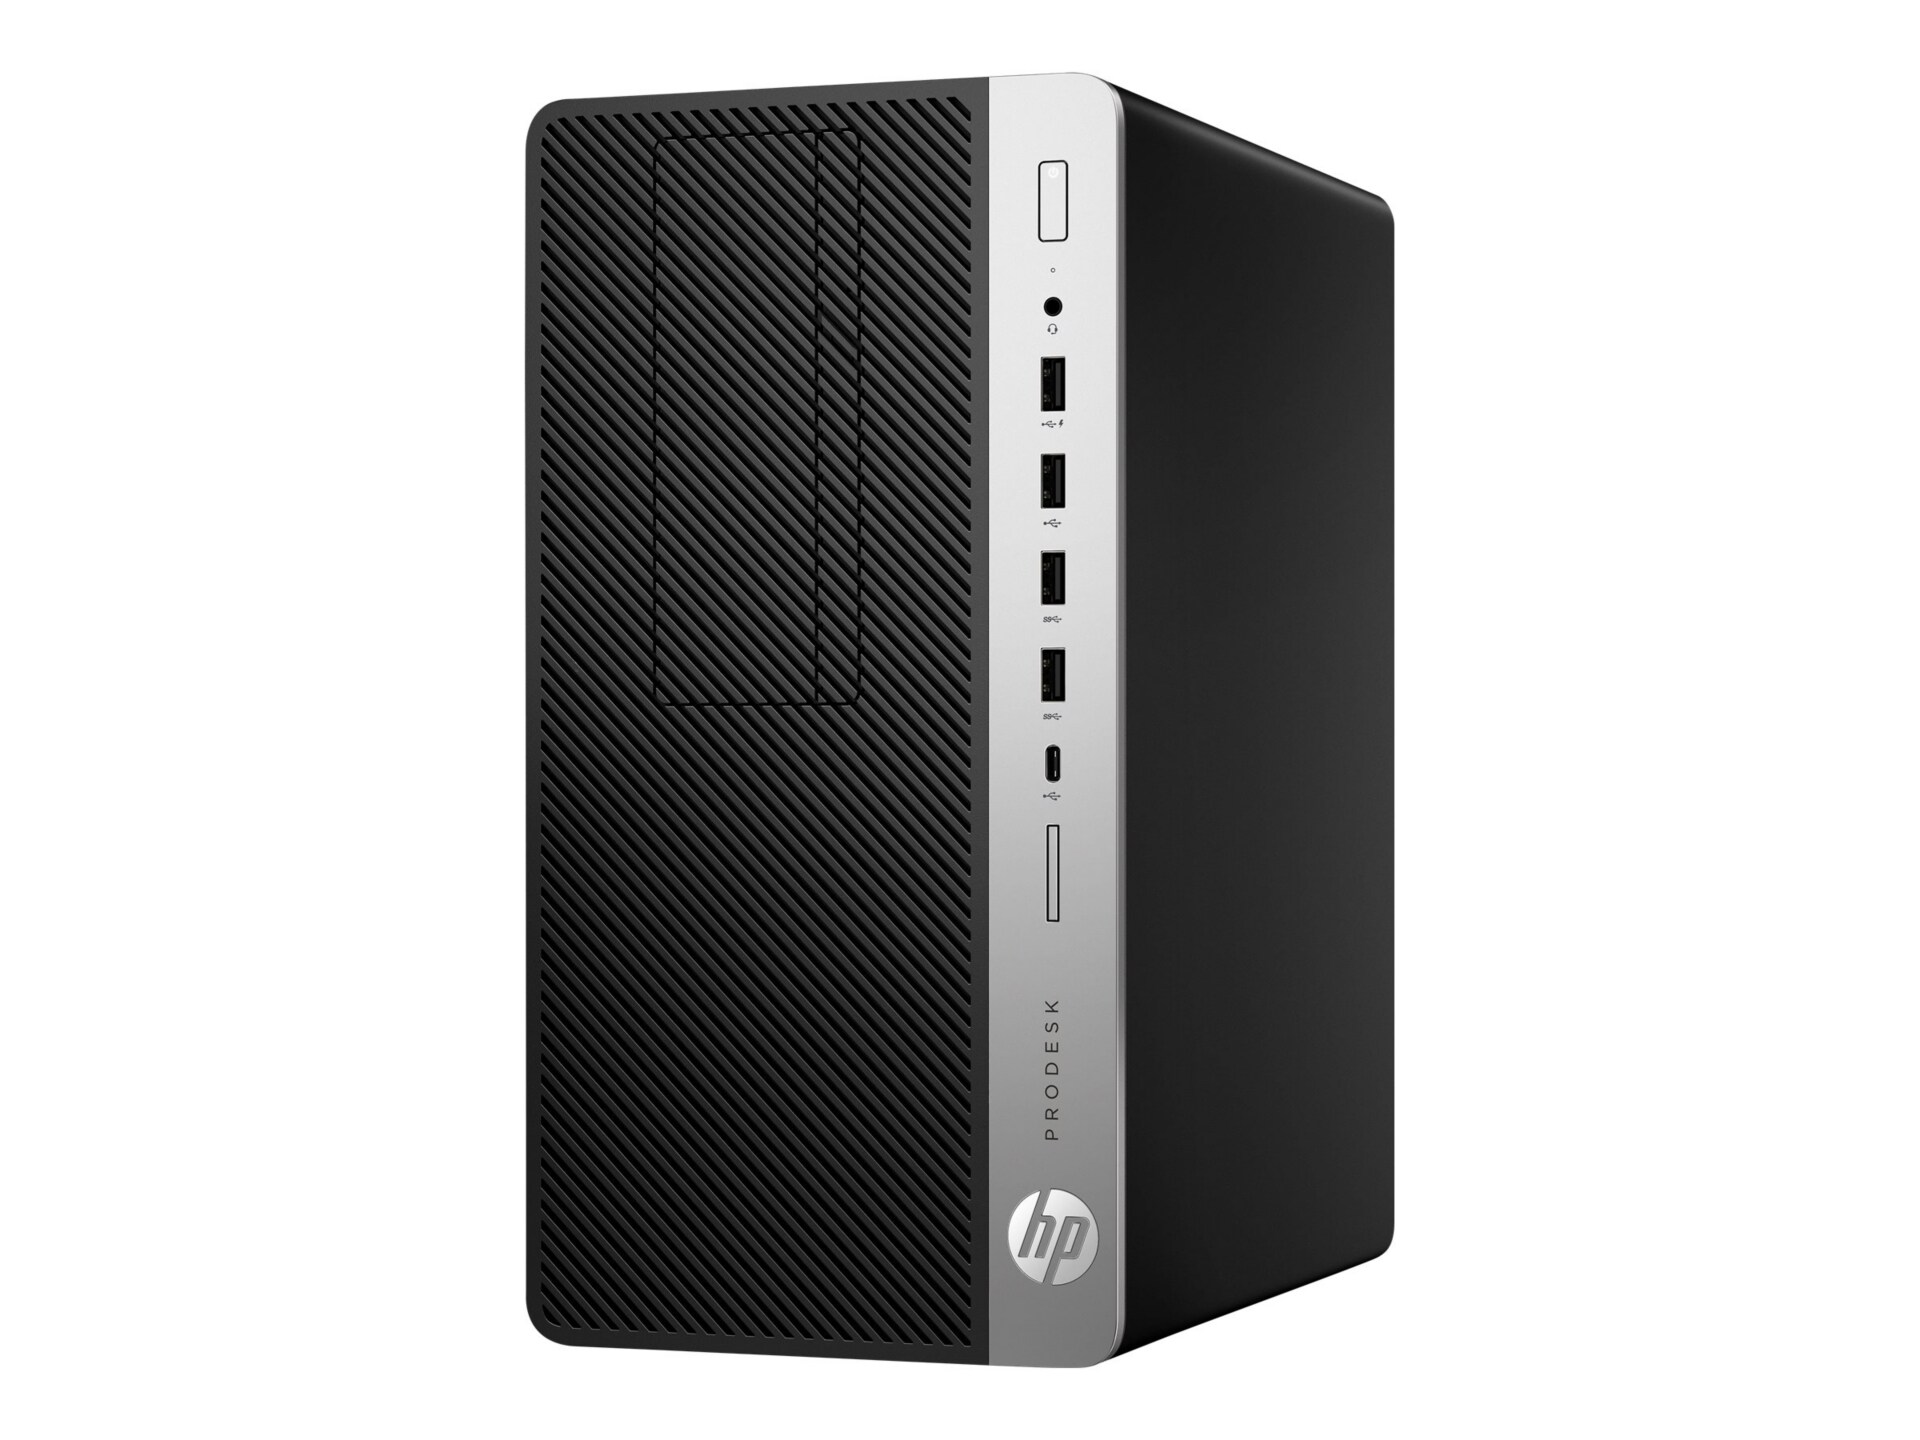 HP ProDesk 600 G3 - micro tower - Core i5 7500 3.4 GHz - 8 GB - 500 GB - US